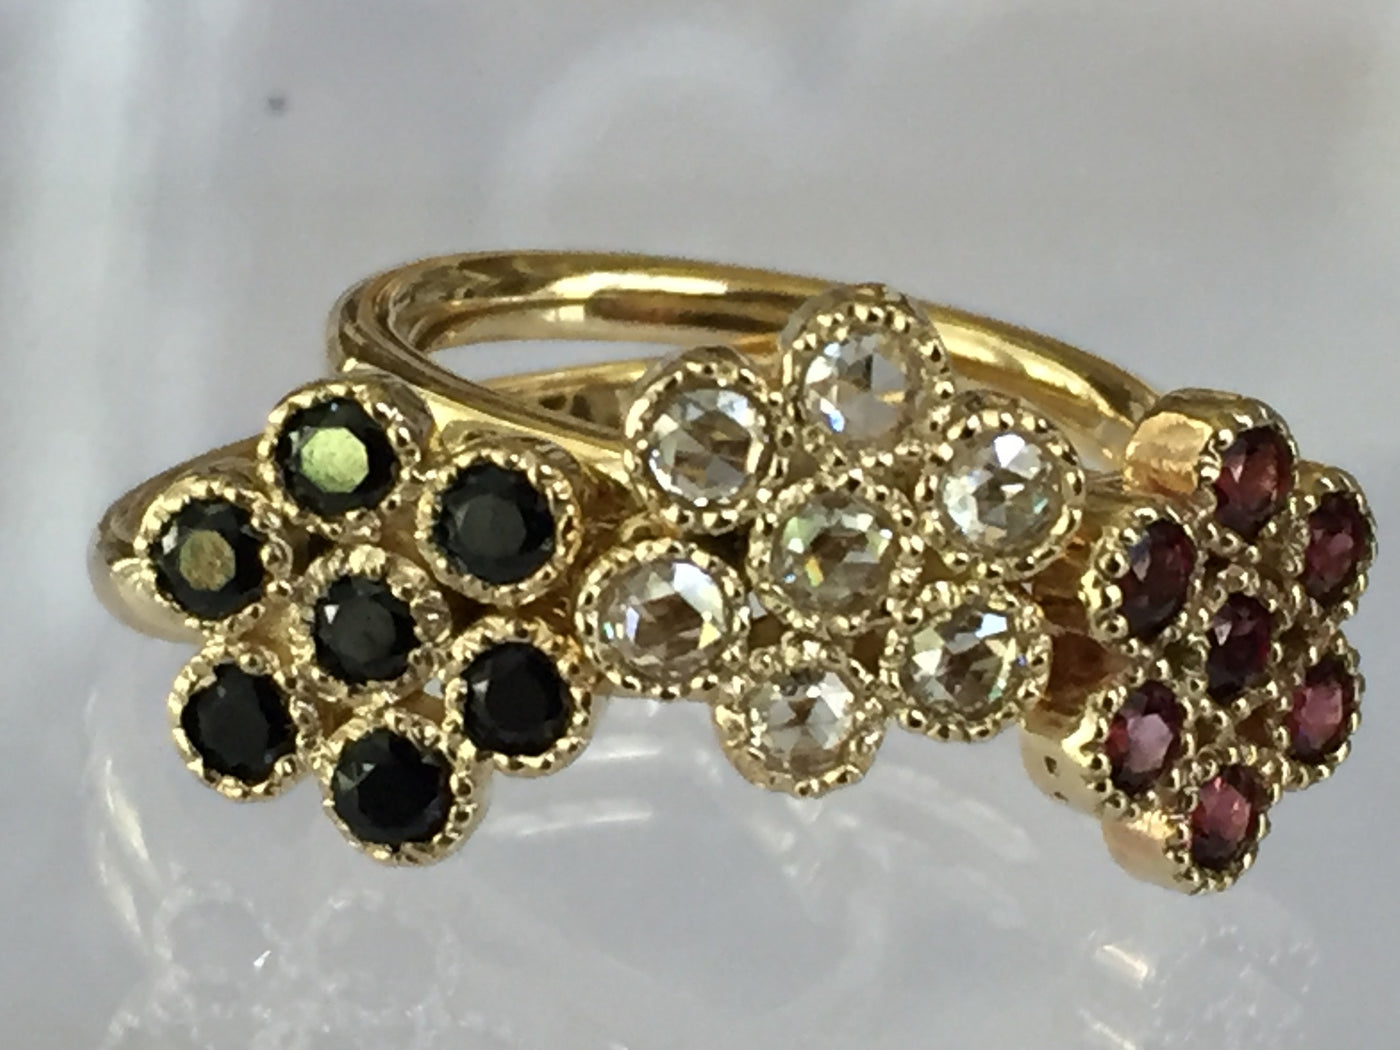 Water Lily Ring with Black Spinel - Lauren Sigman Collection